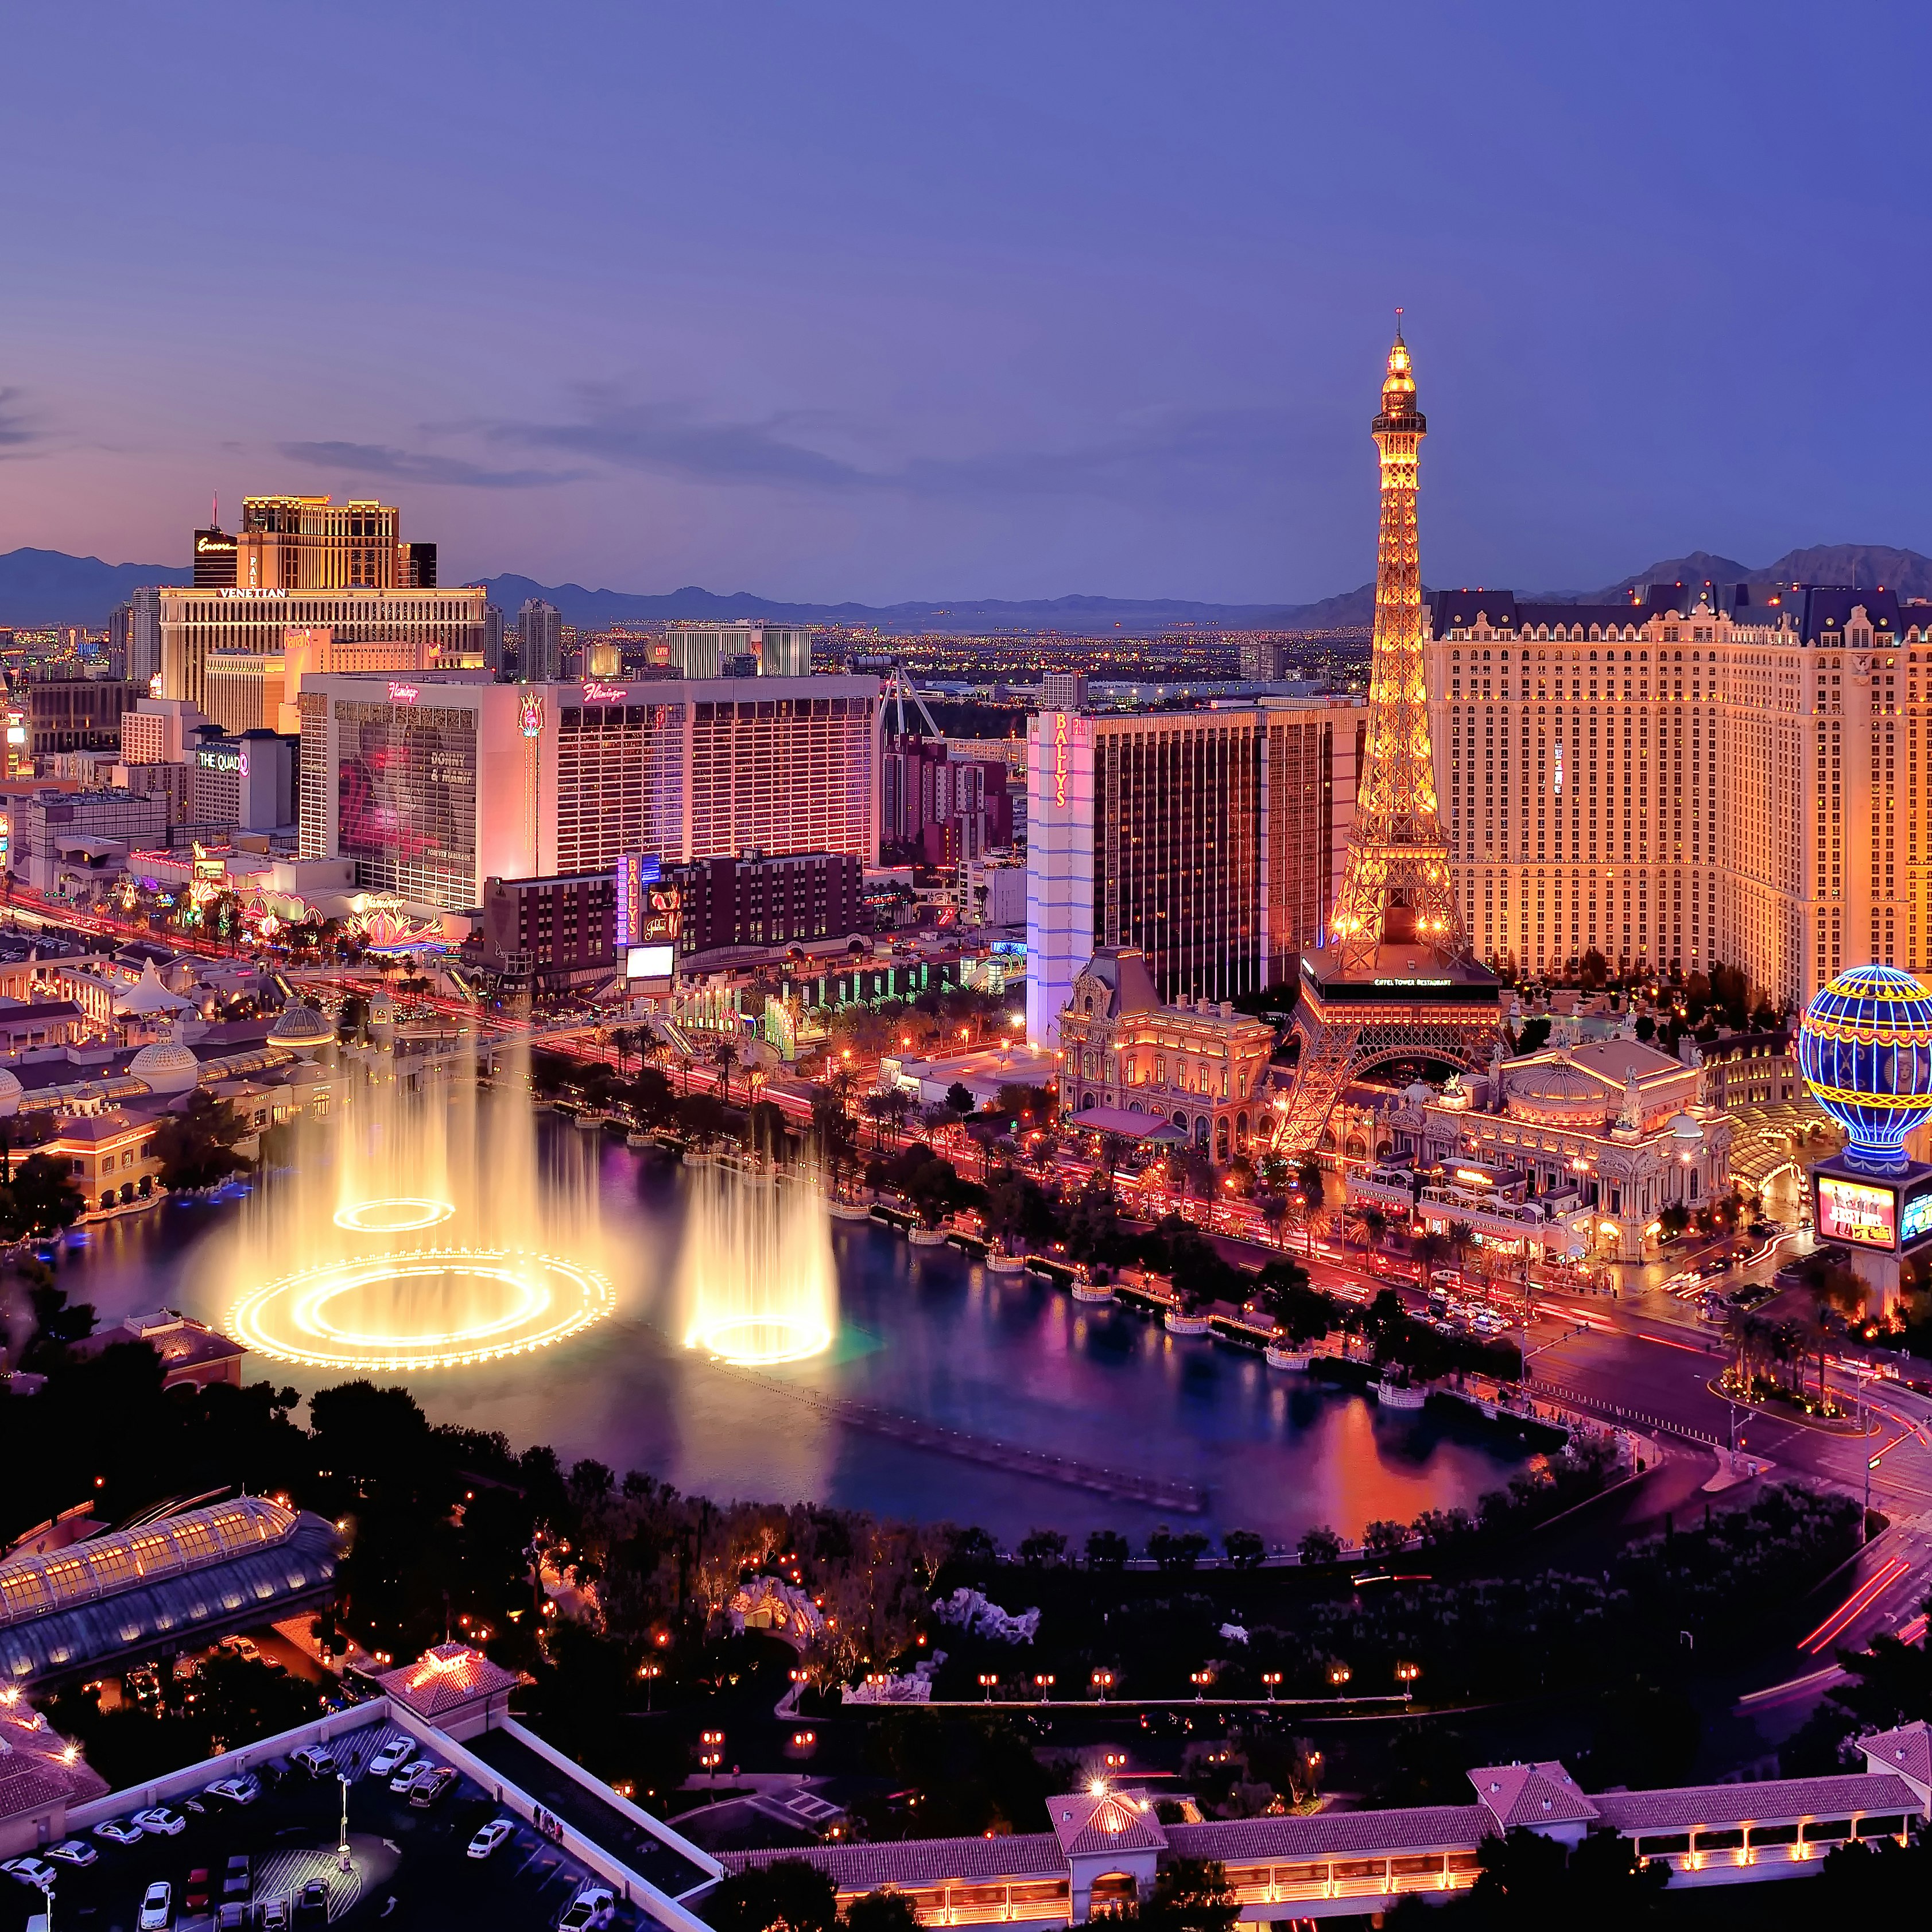 The Las Vegas strip with the fountains of the Bellagio leaping into the air photographed at dusk. 